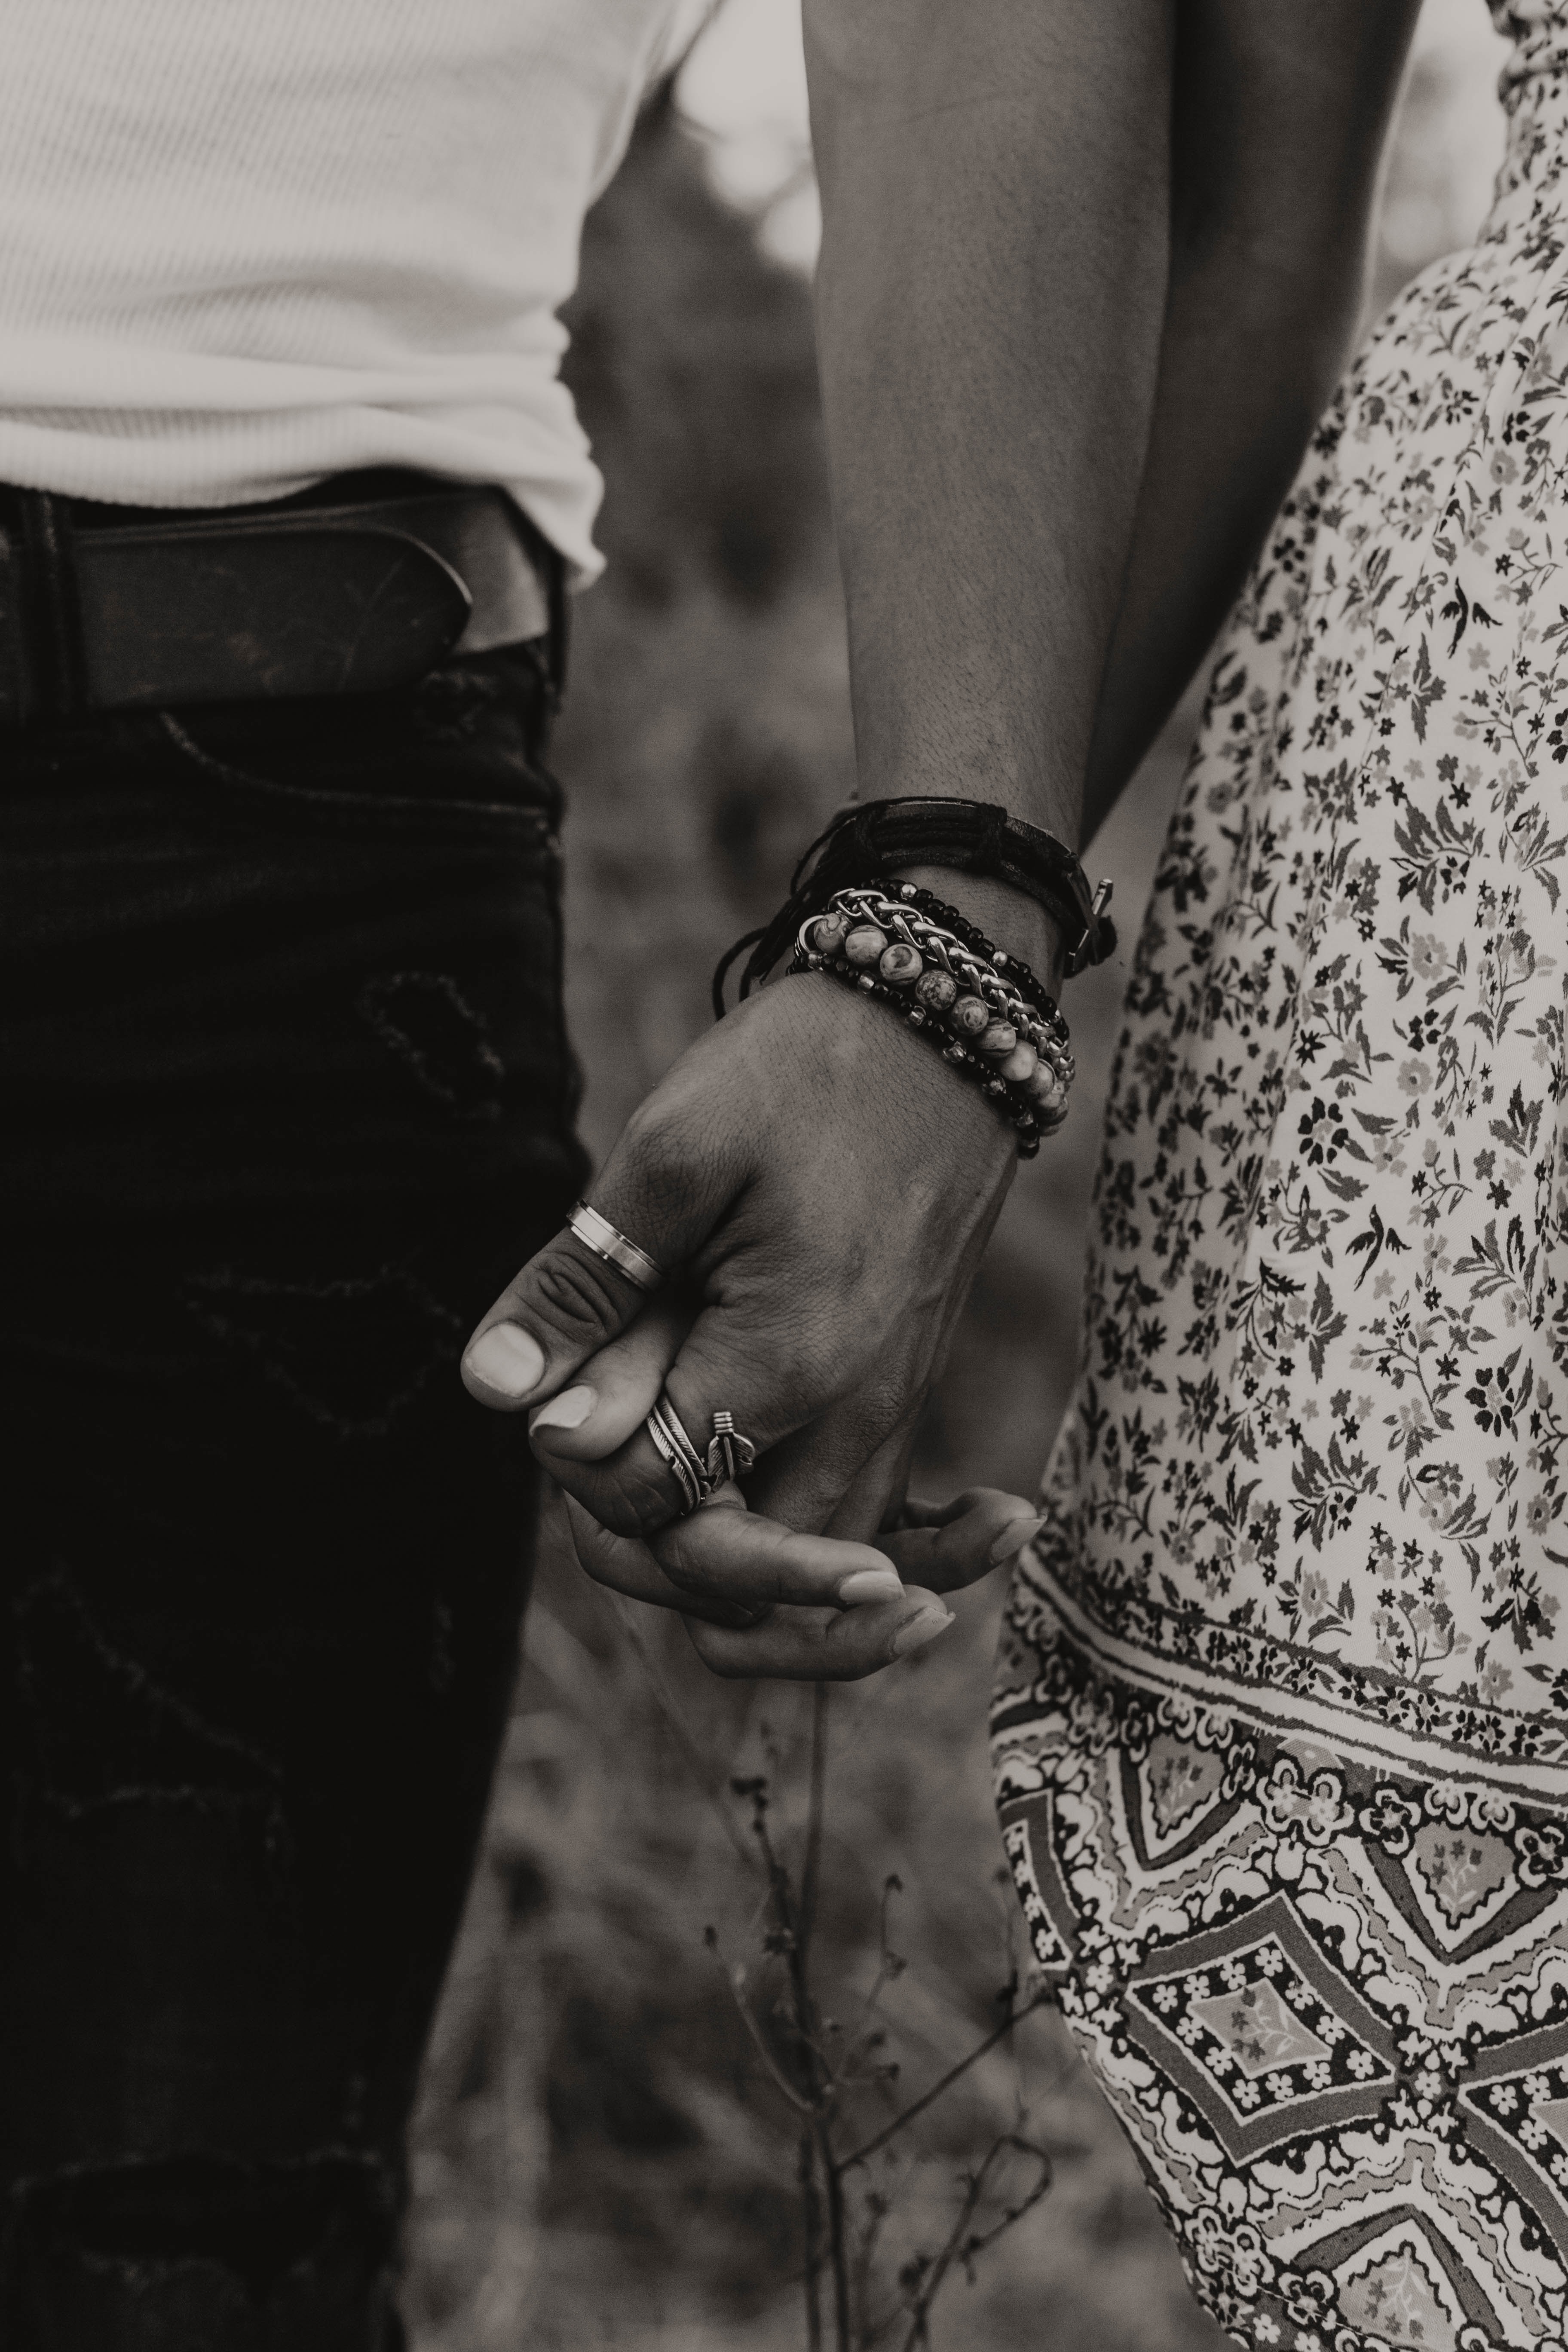 52376 download wallpaper love, rings, couple, pair, hands, bw, chb, romance screensavers and pictures for free